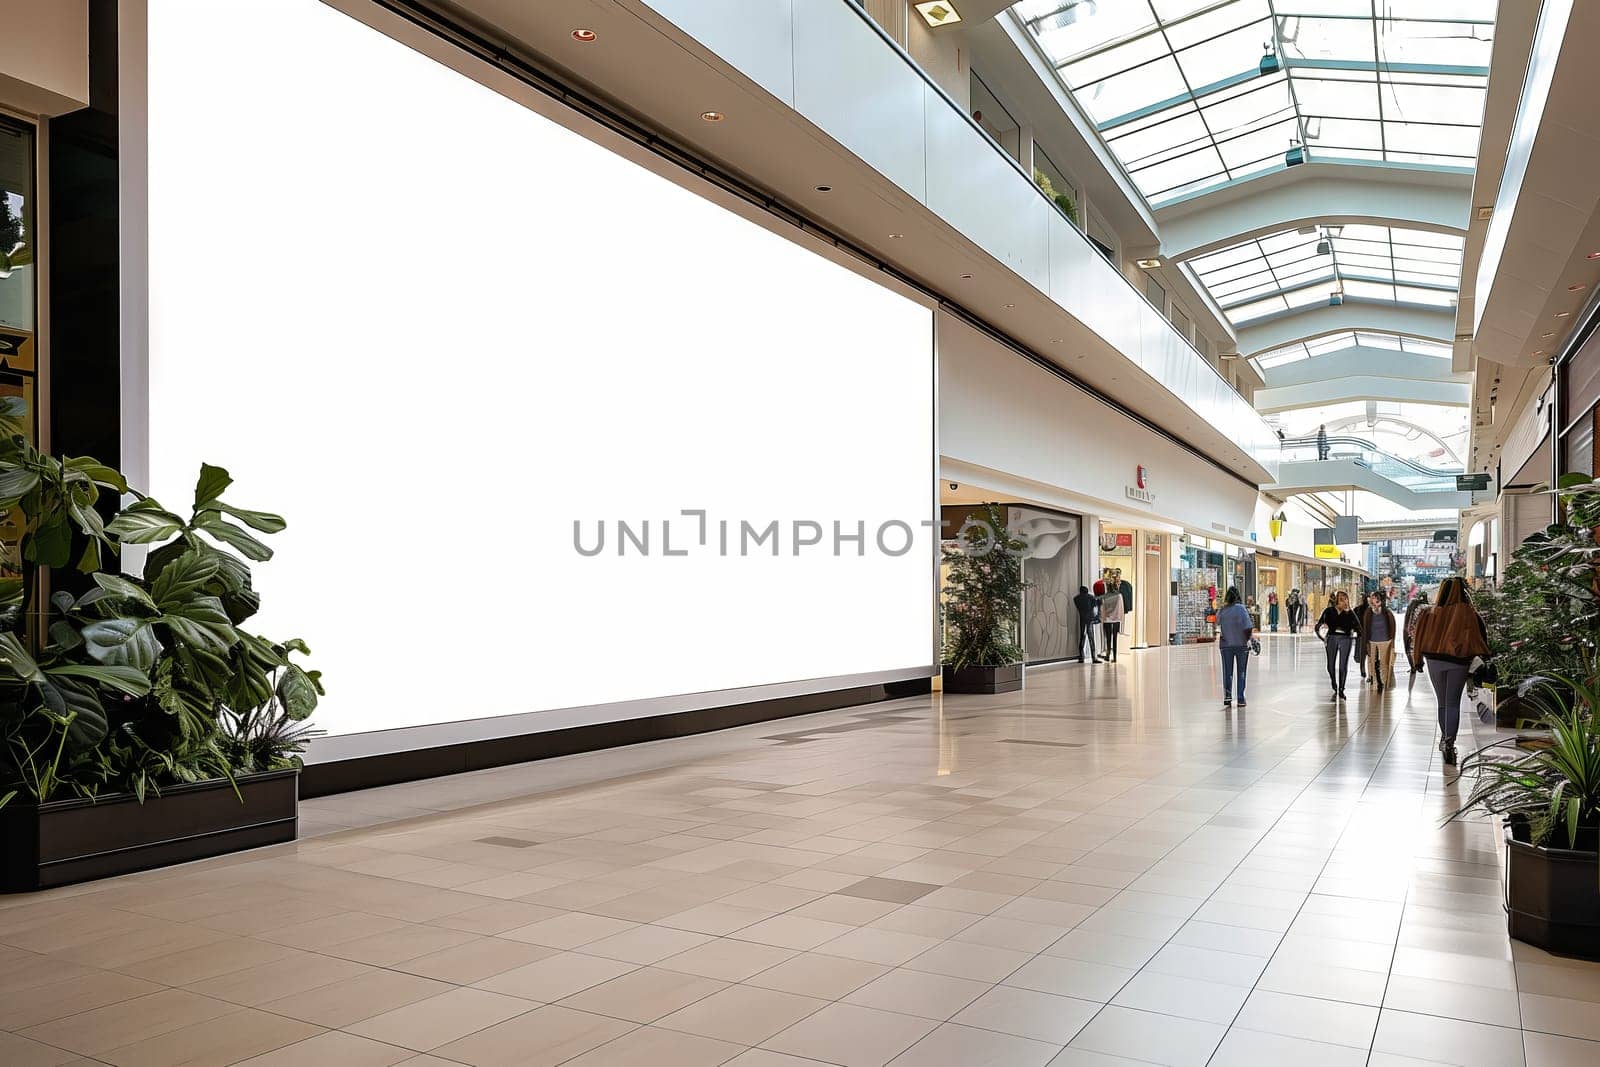 A large white billboard is a fixture in the malls central area by richwolf